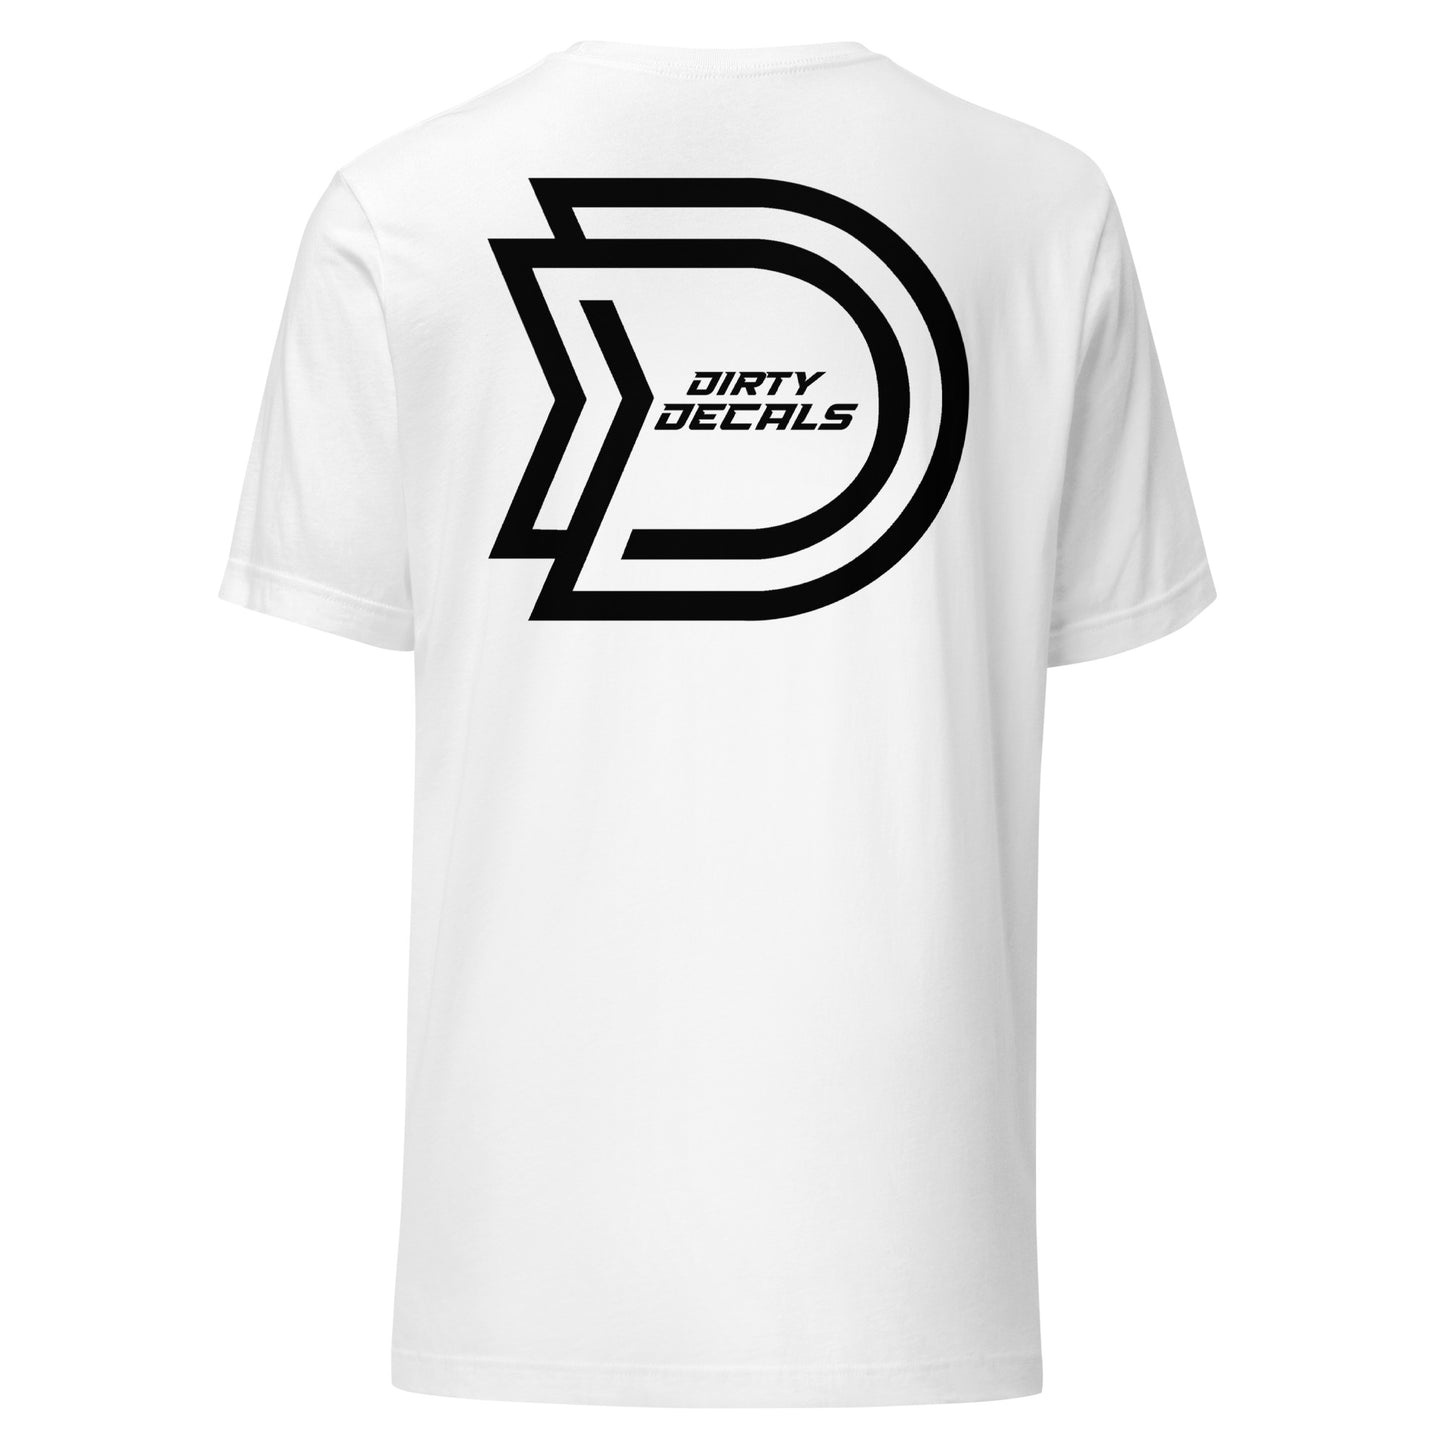 Dirty Decals T-Shirt